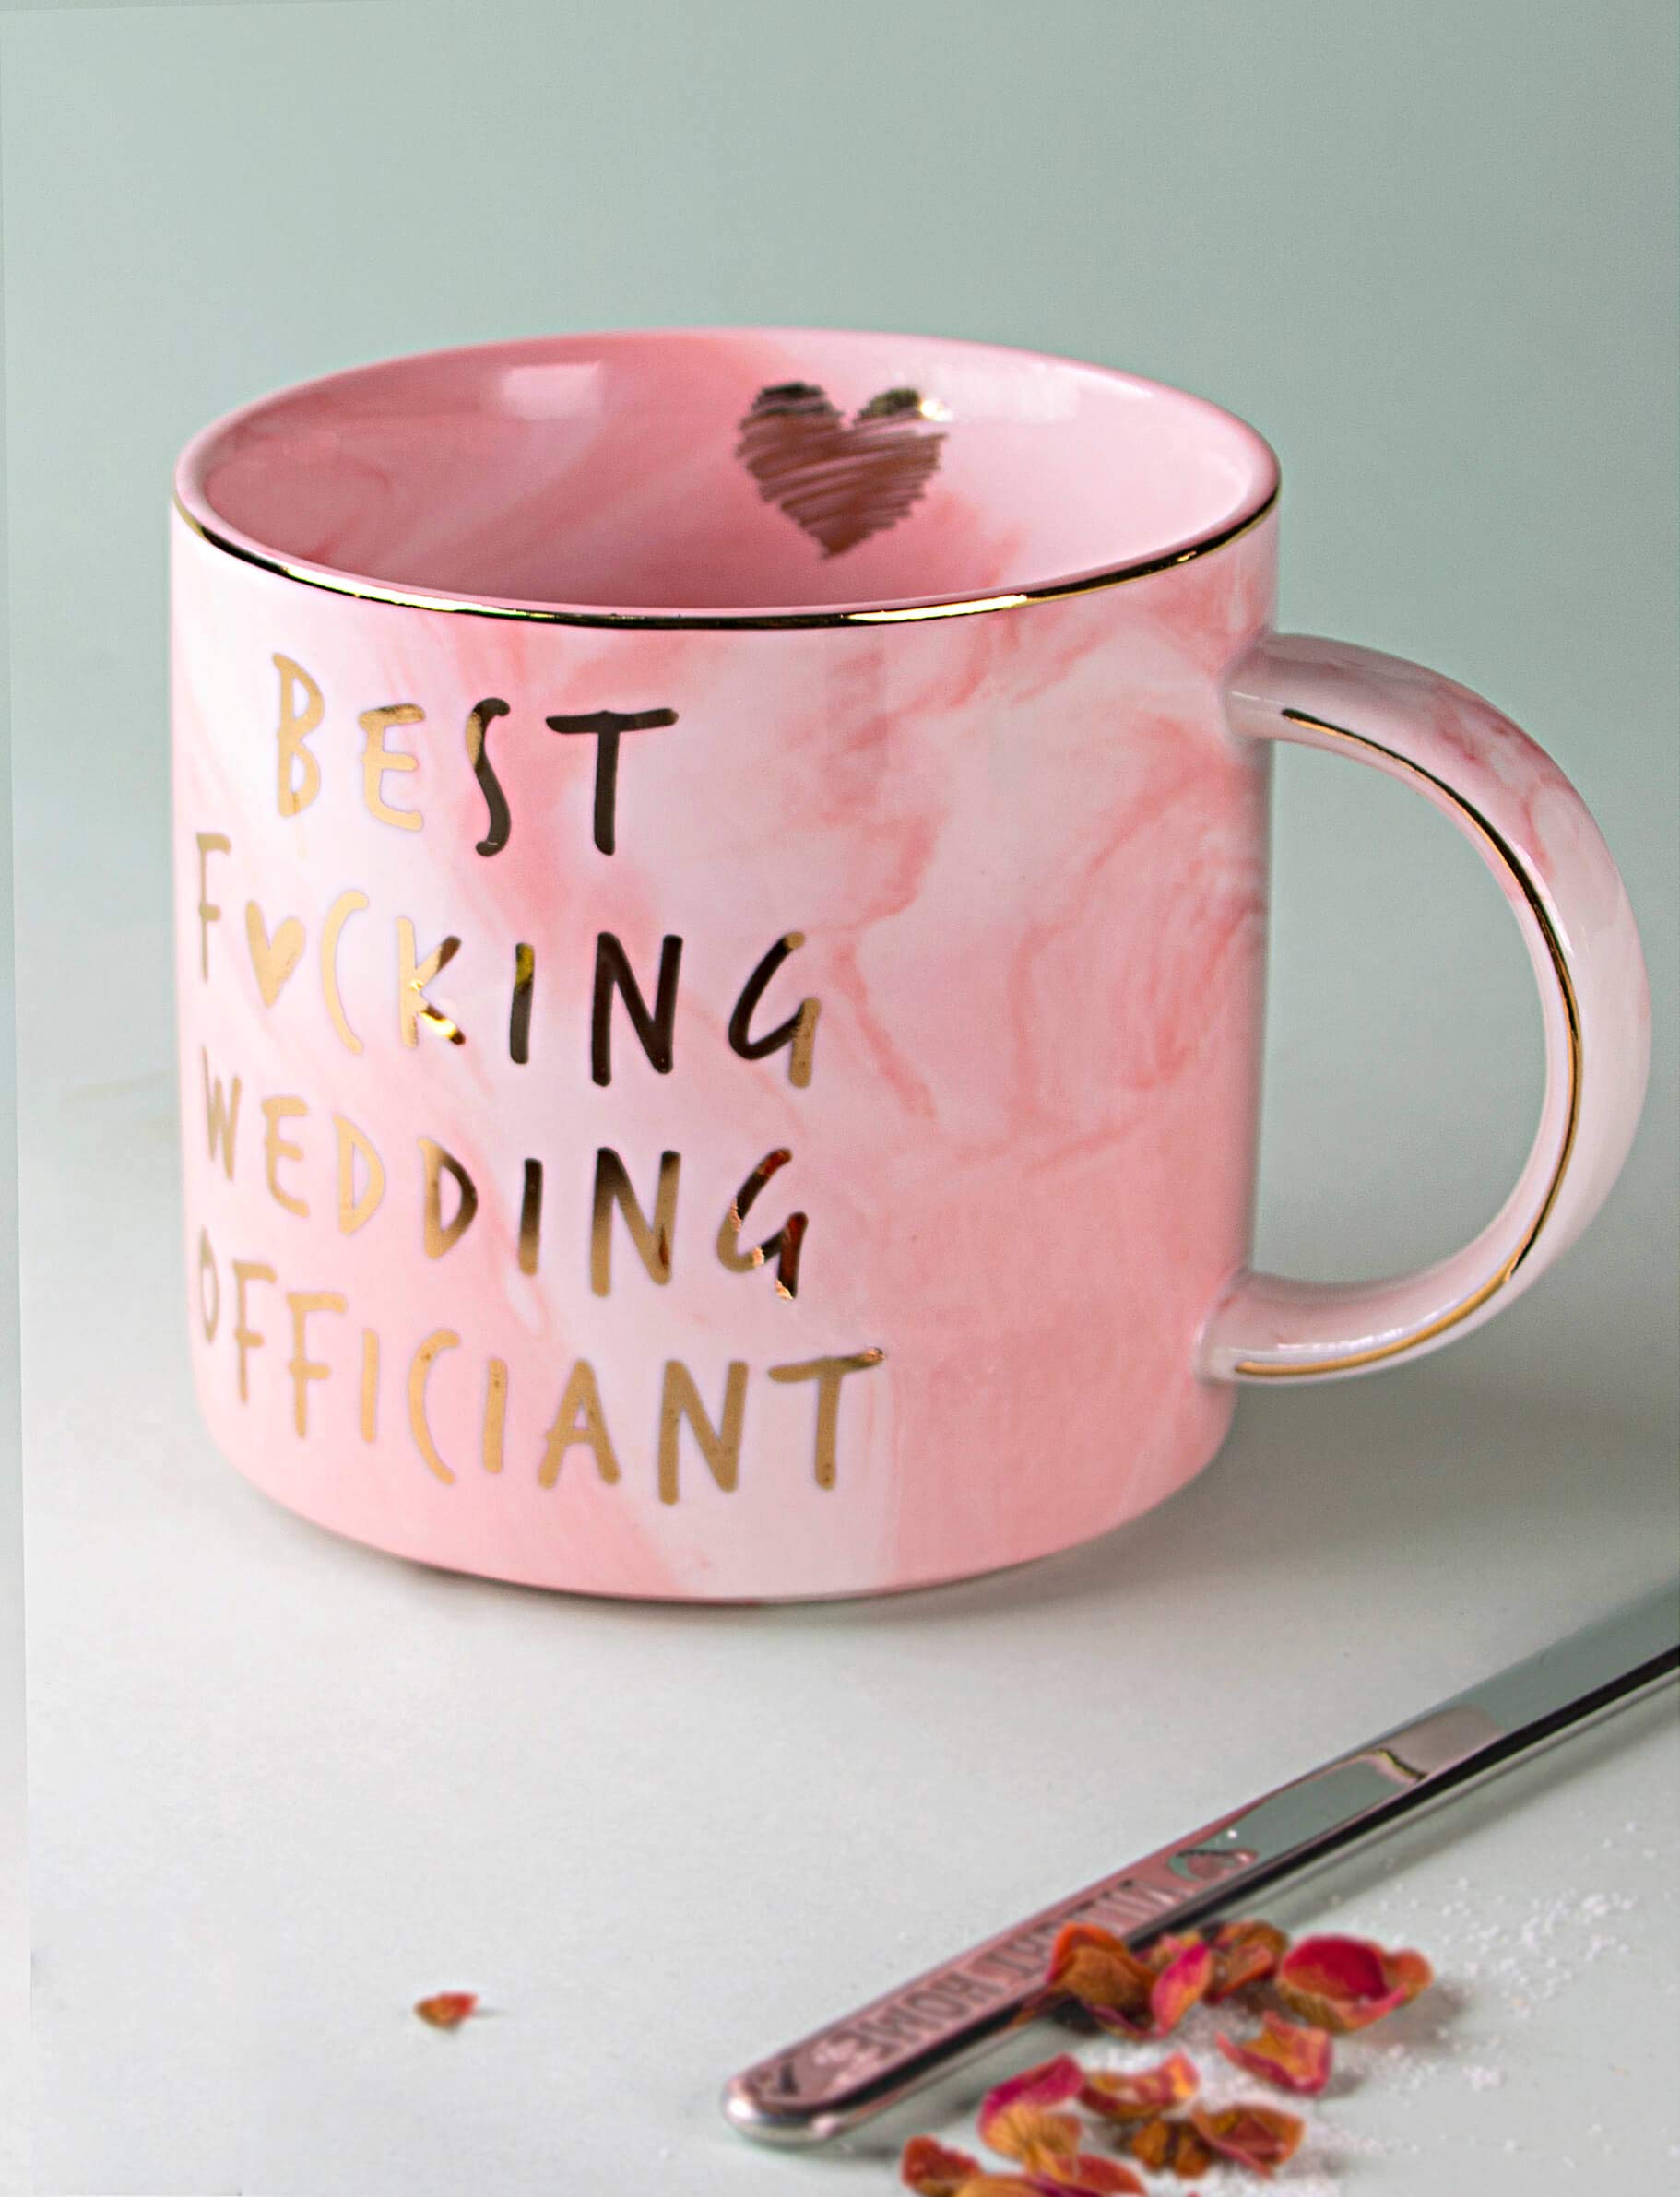 VILIGHT Best Wedding Officiant Mug - Funny Thank You Gifts - Pink Marble Ceramic Coffee Cup 11.5 Oz